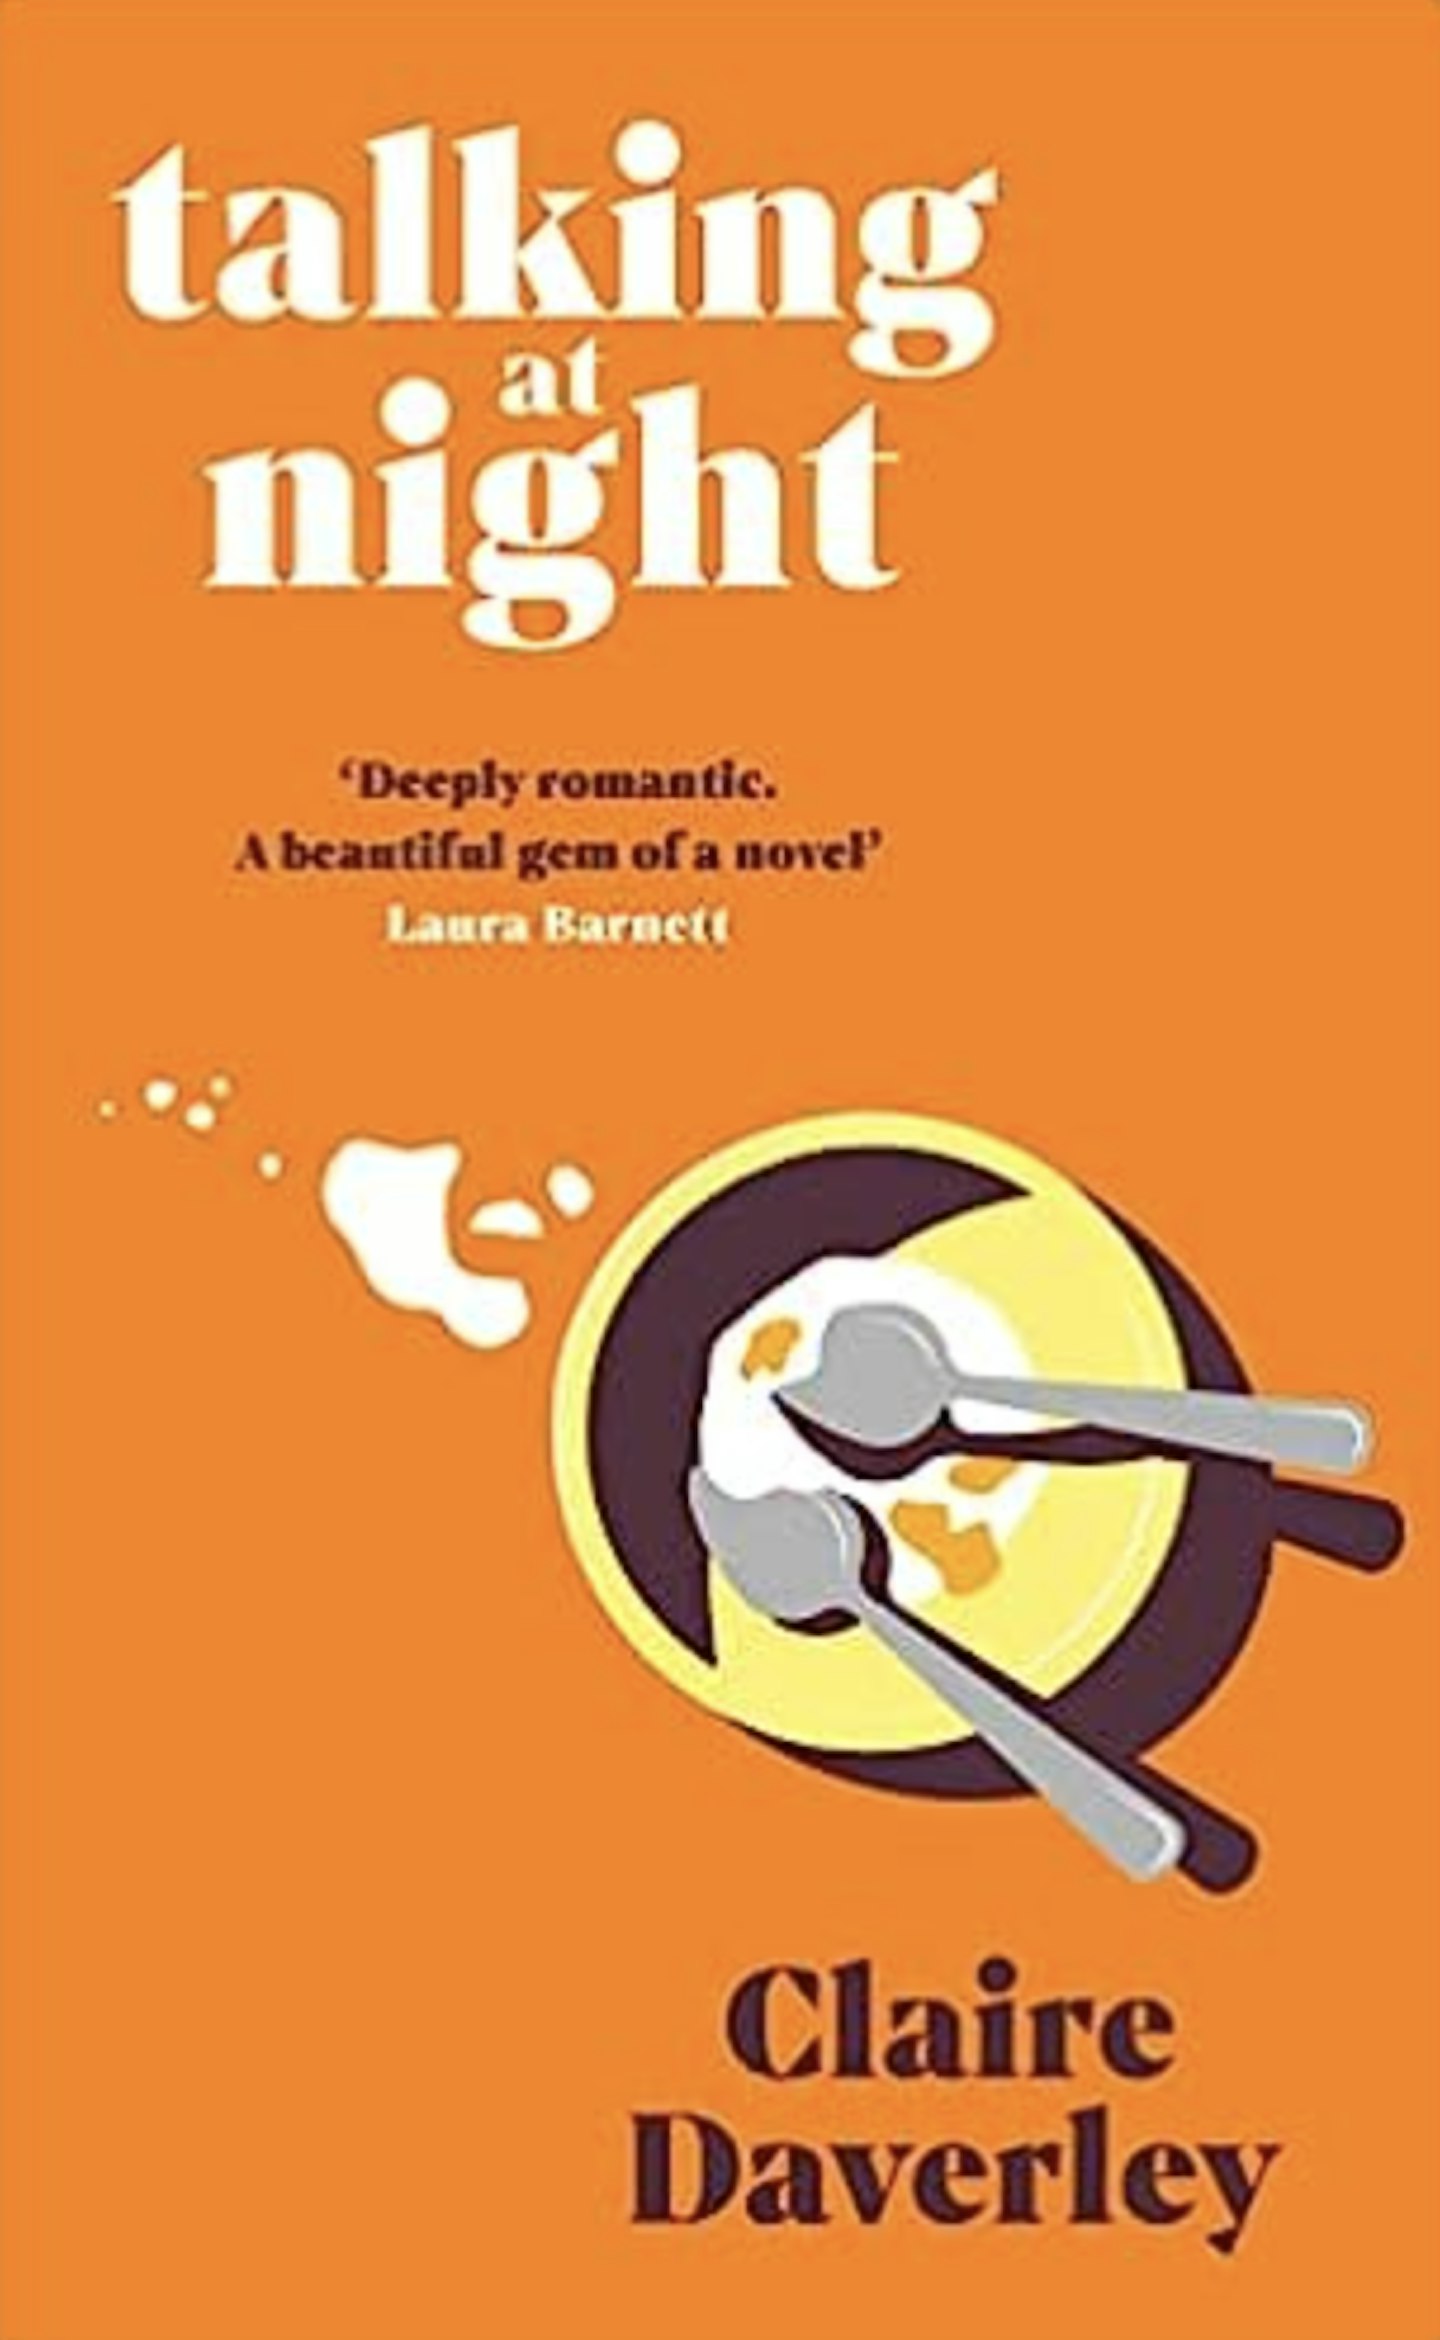 Book cover of talking at night by Claire Daverley